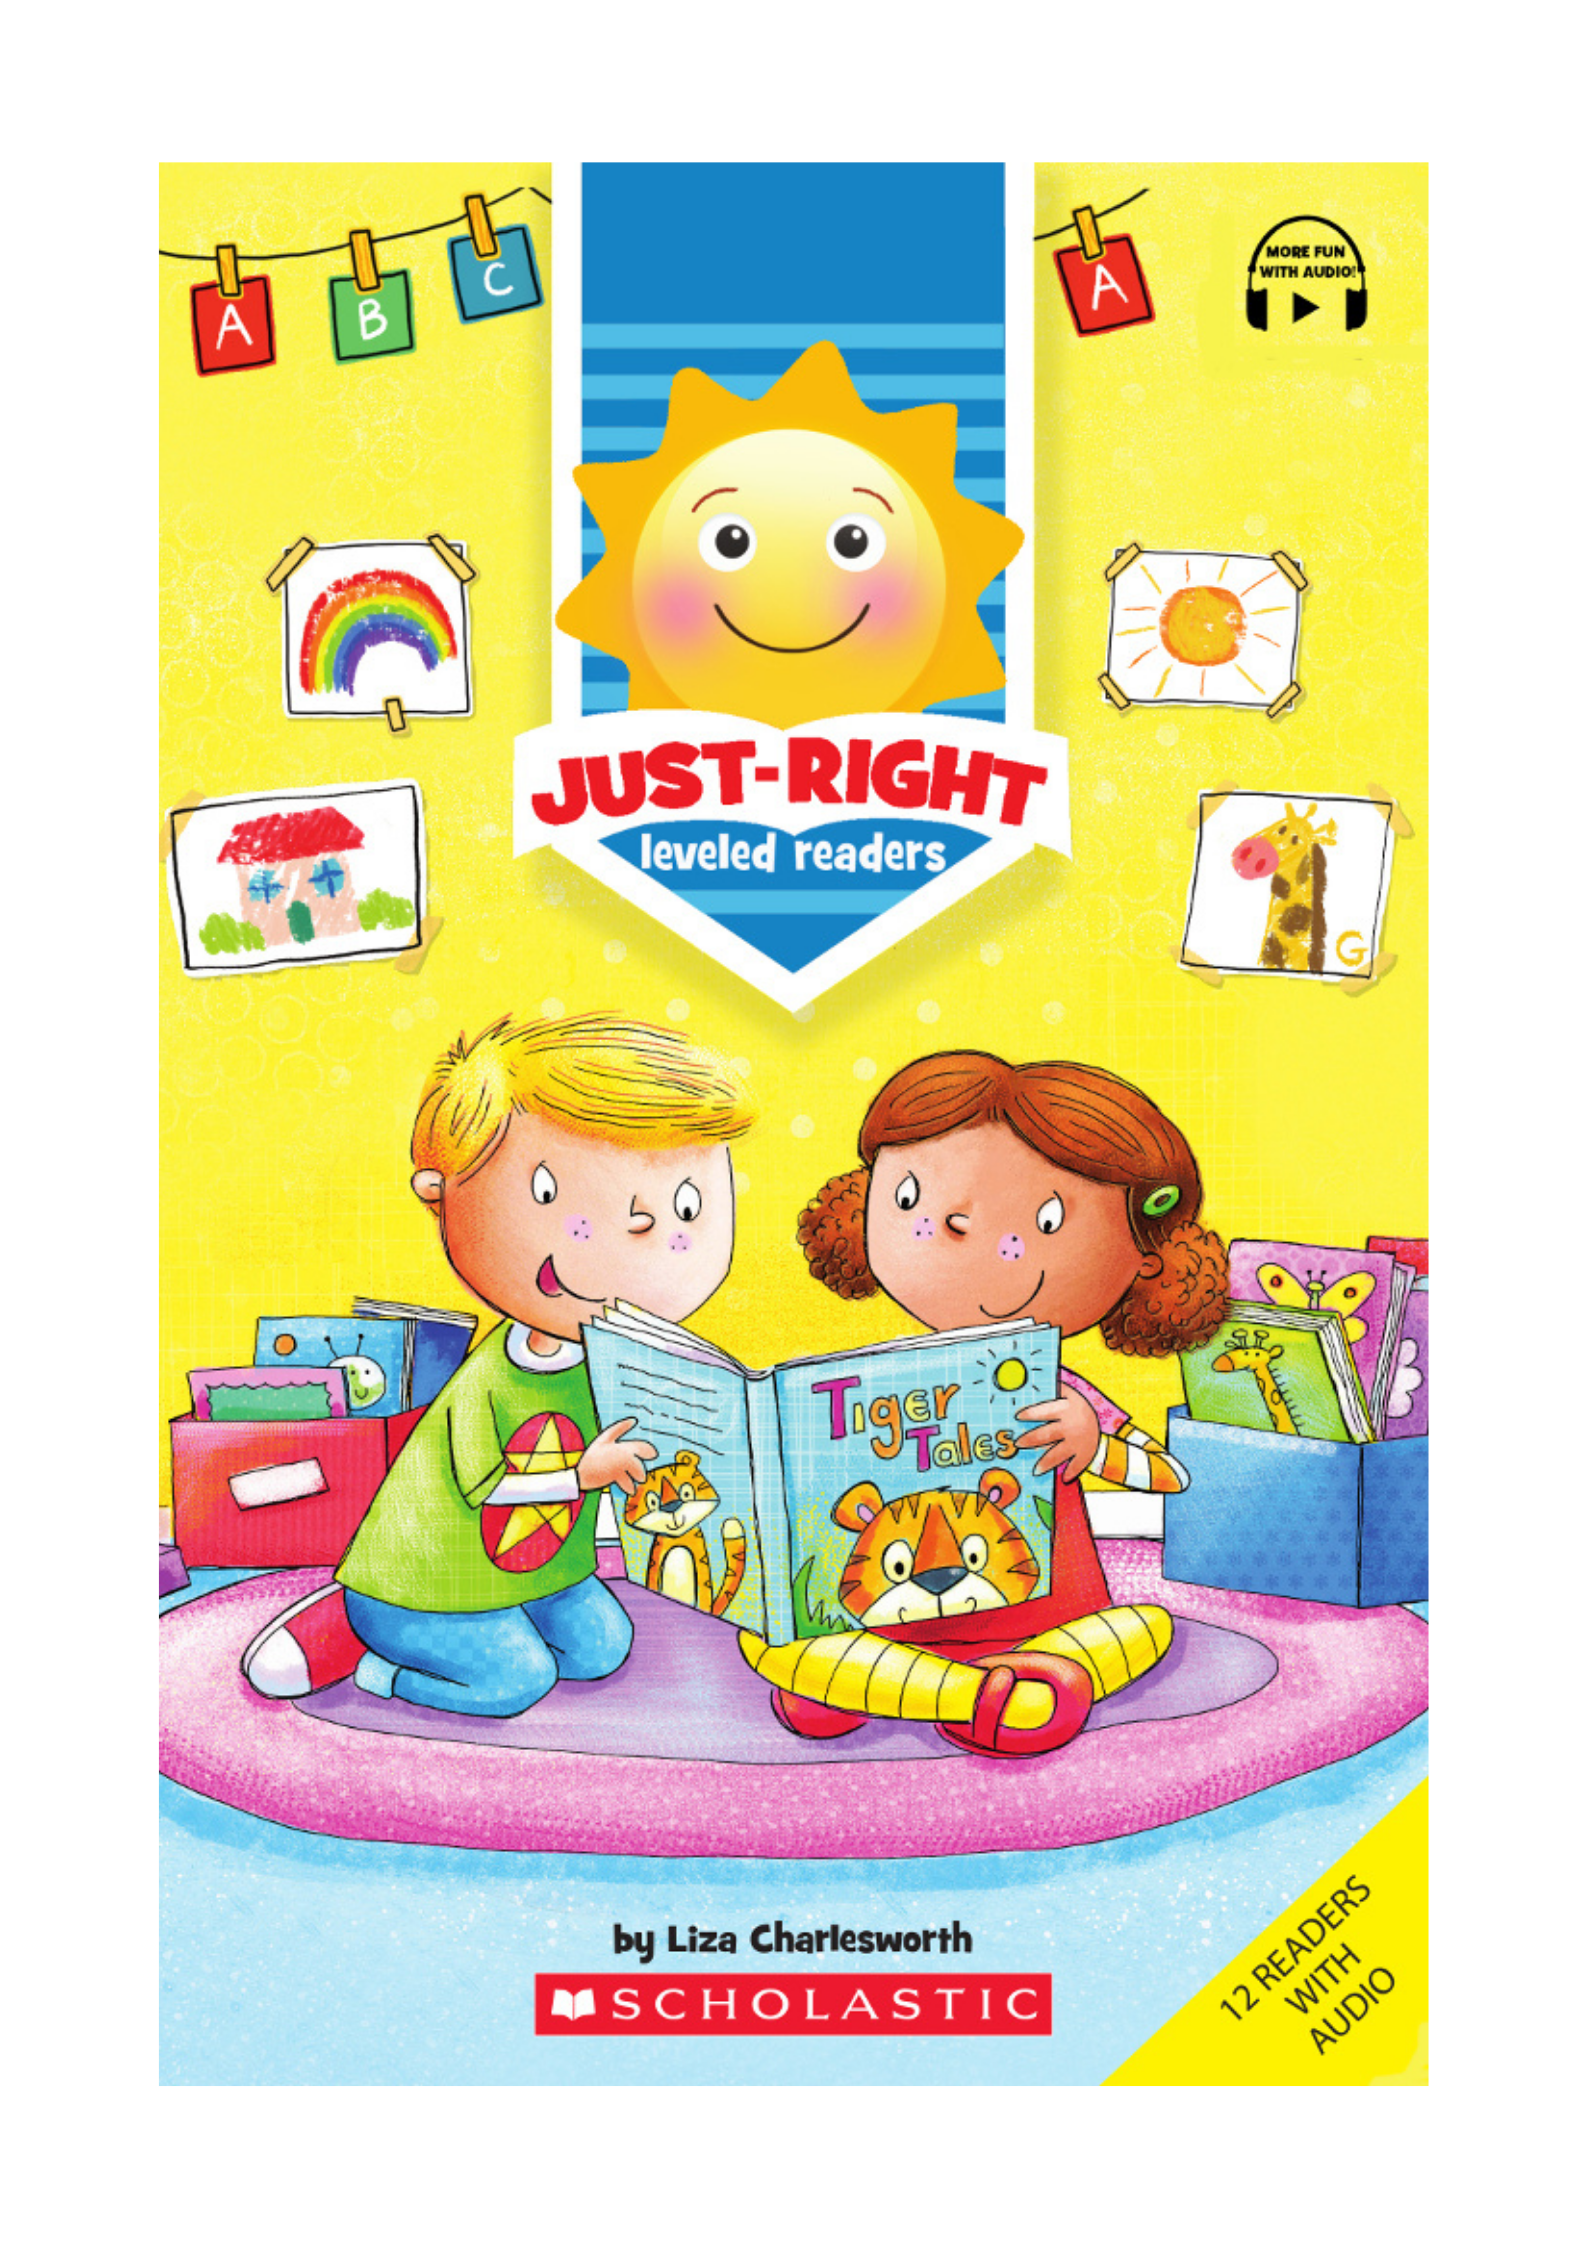 Just-Right Leveled Readers